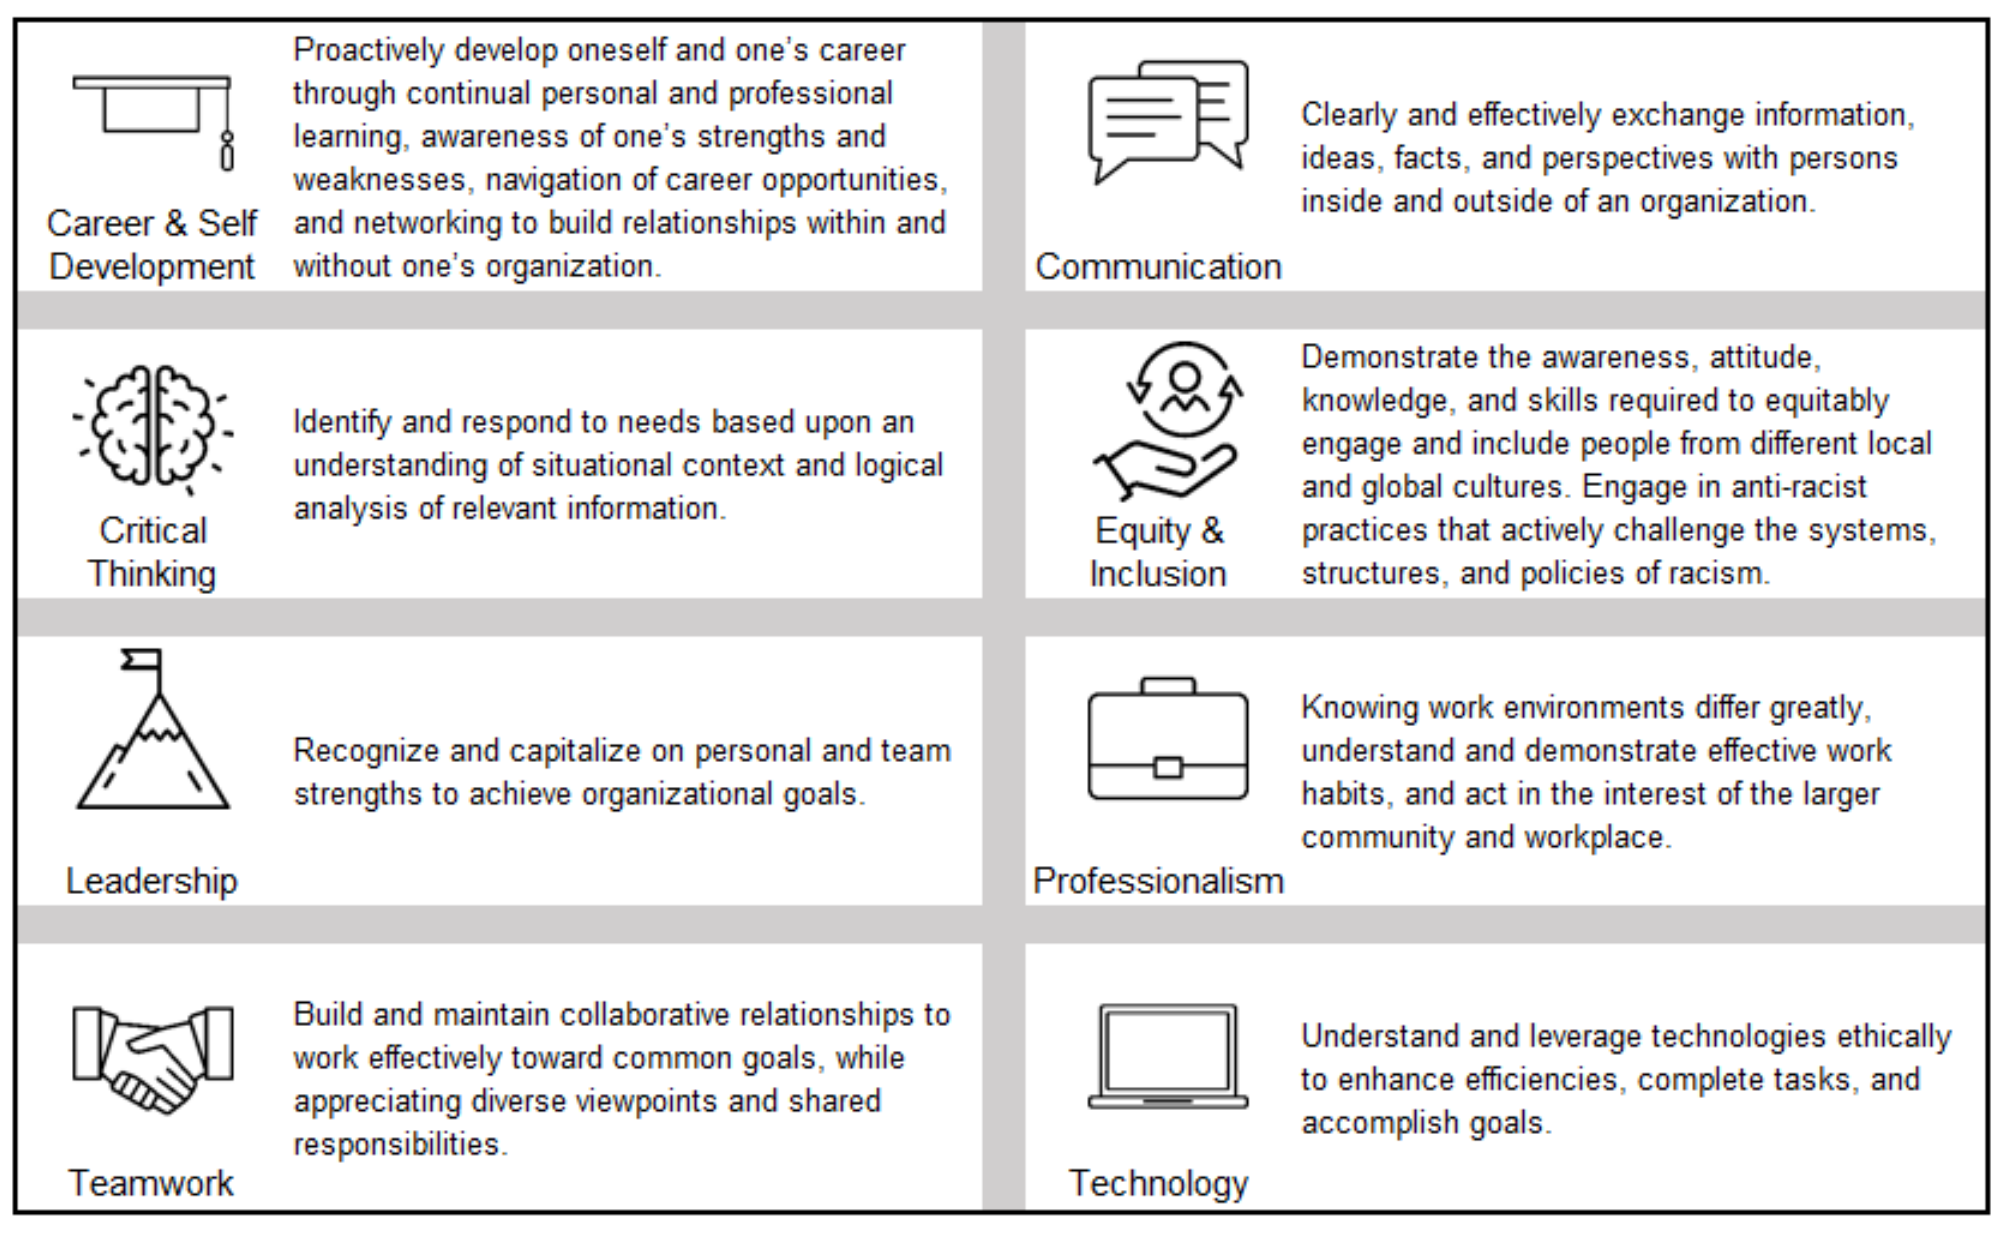 Grid listing the eight career competencies with brief descriptions. Republished with permission from